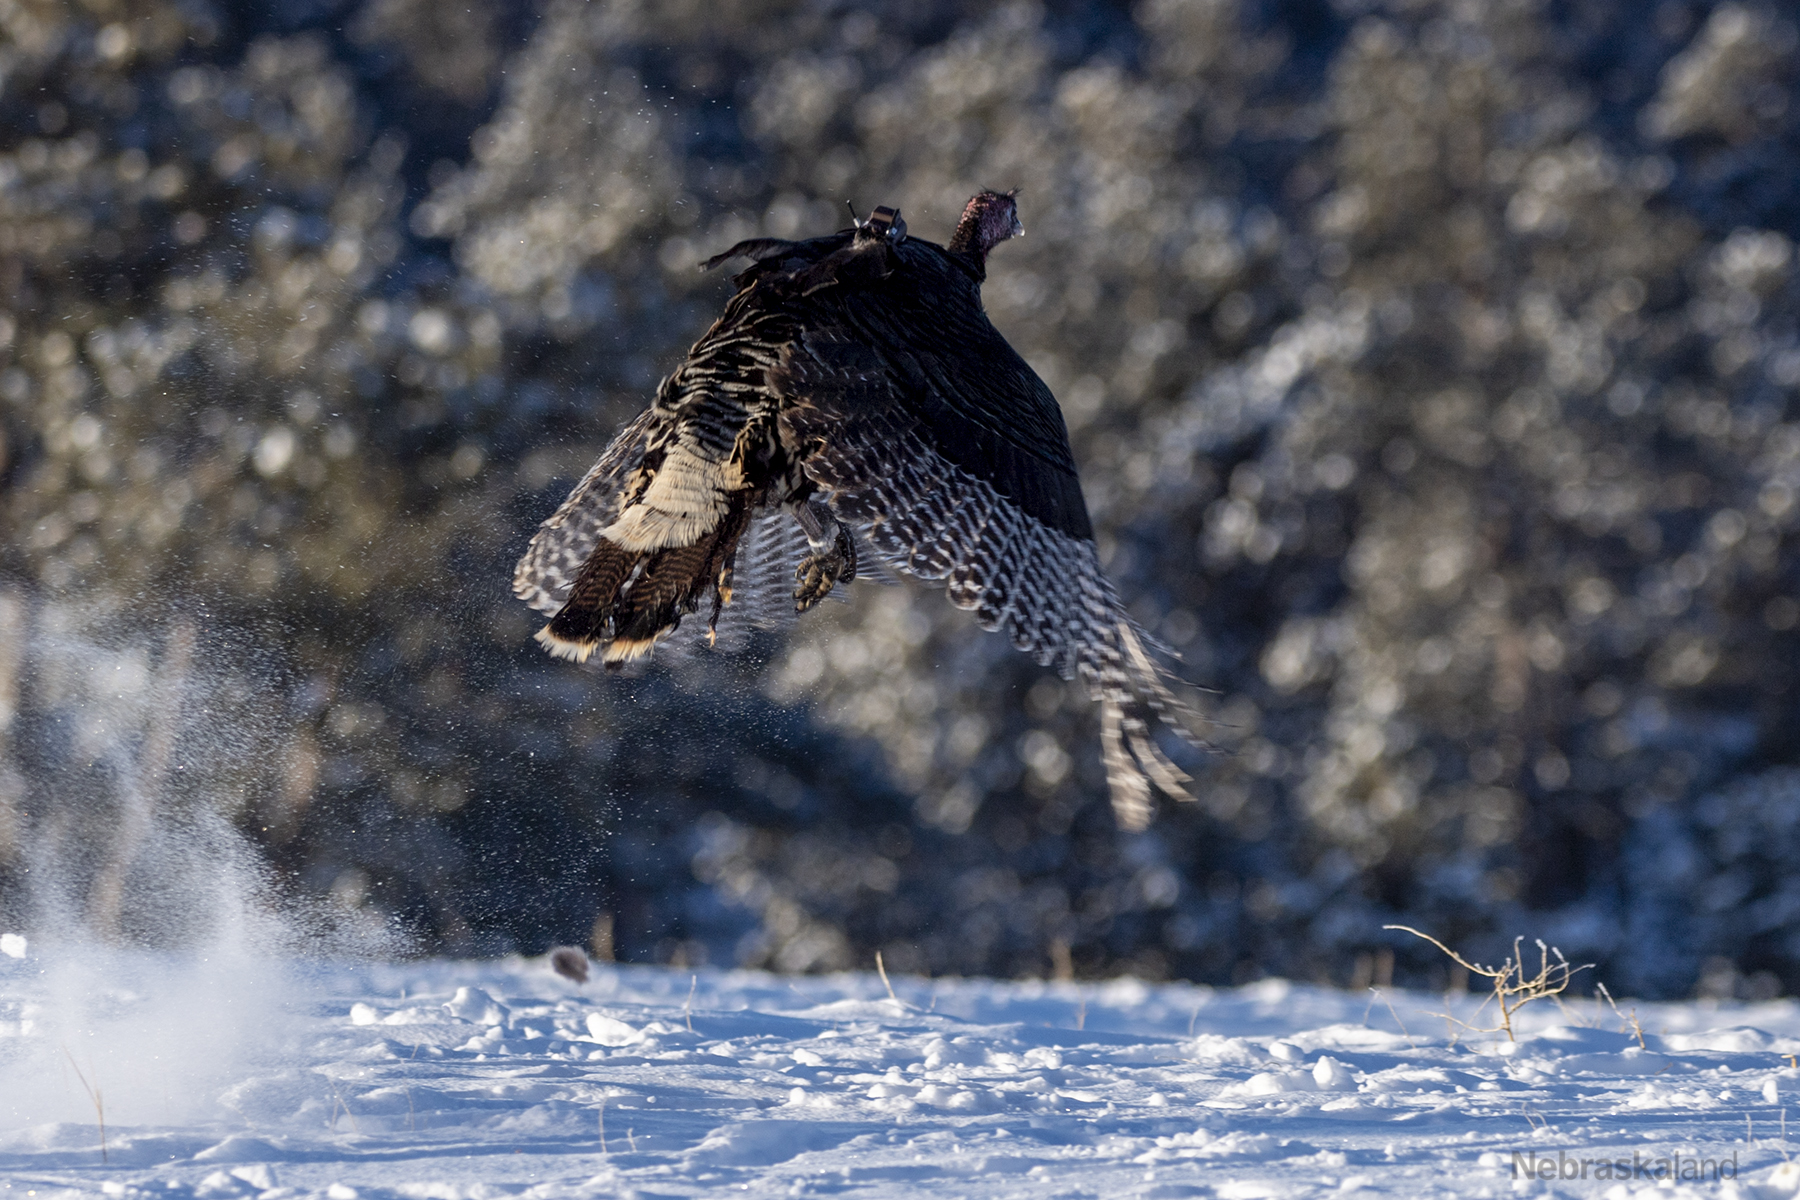 A wild turkey flies away in the snow after being fitted with a backpack-style GPS tracker